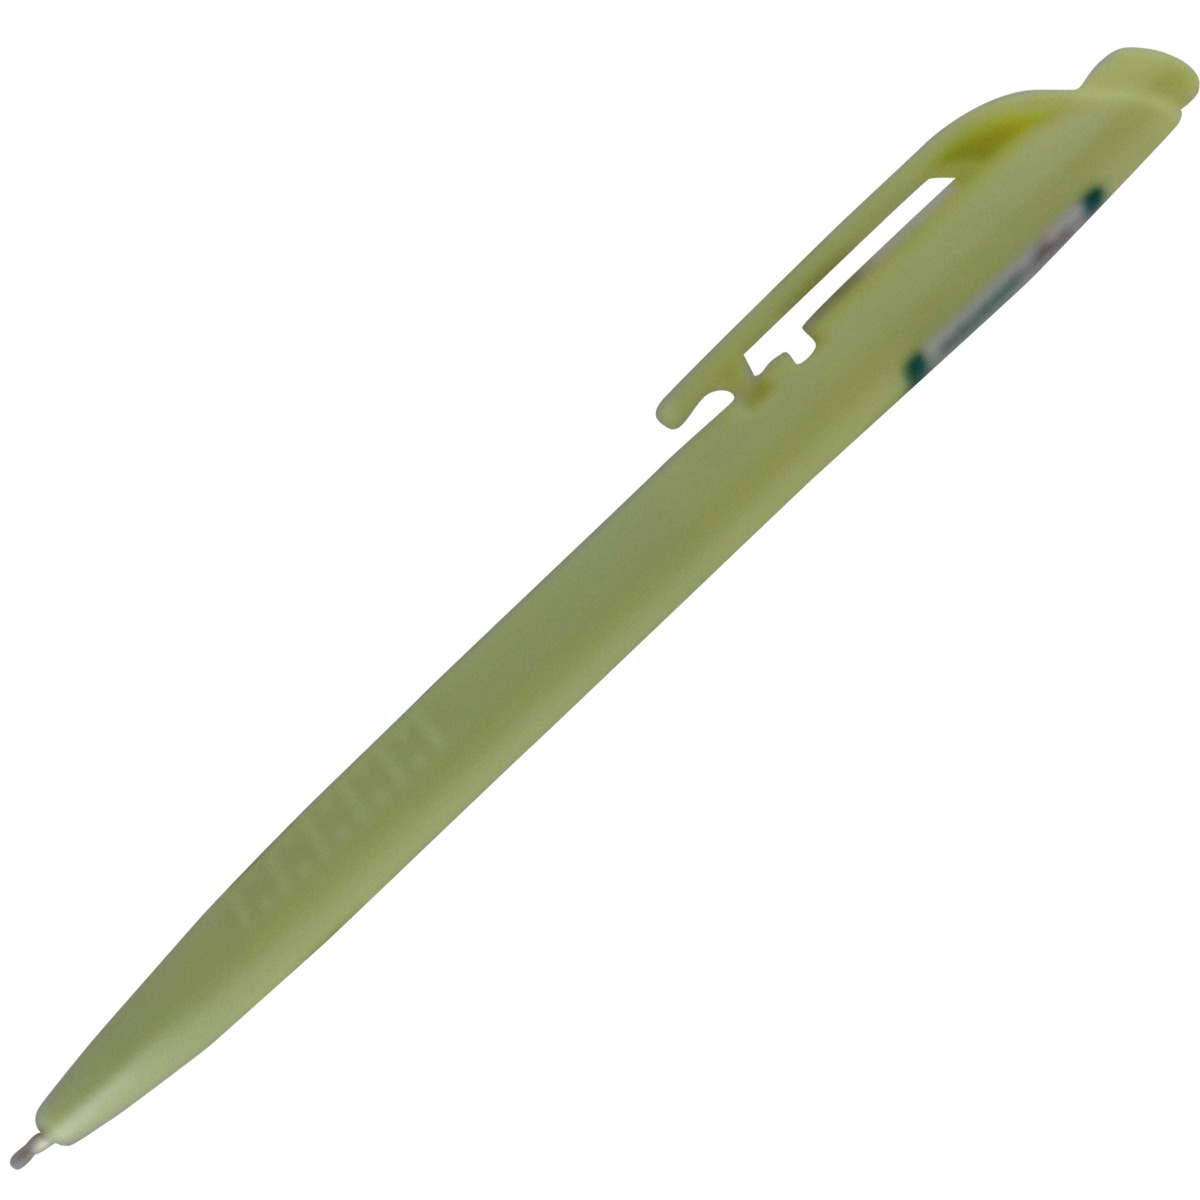 Hauser Billi Model: 13625 Pale yellow color body with Blue ink fine Tip rectractable ball pen